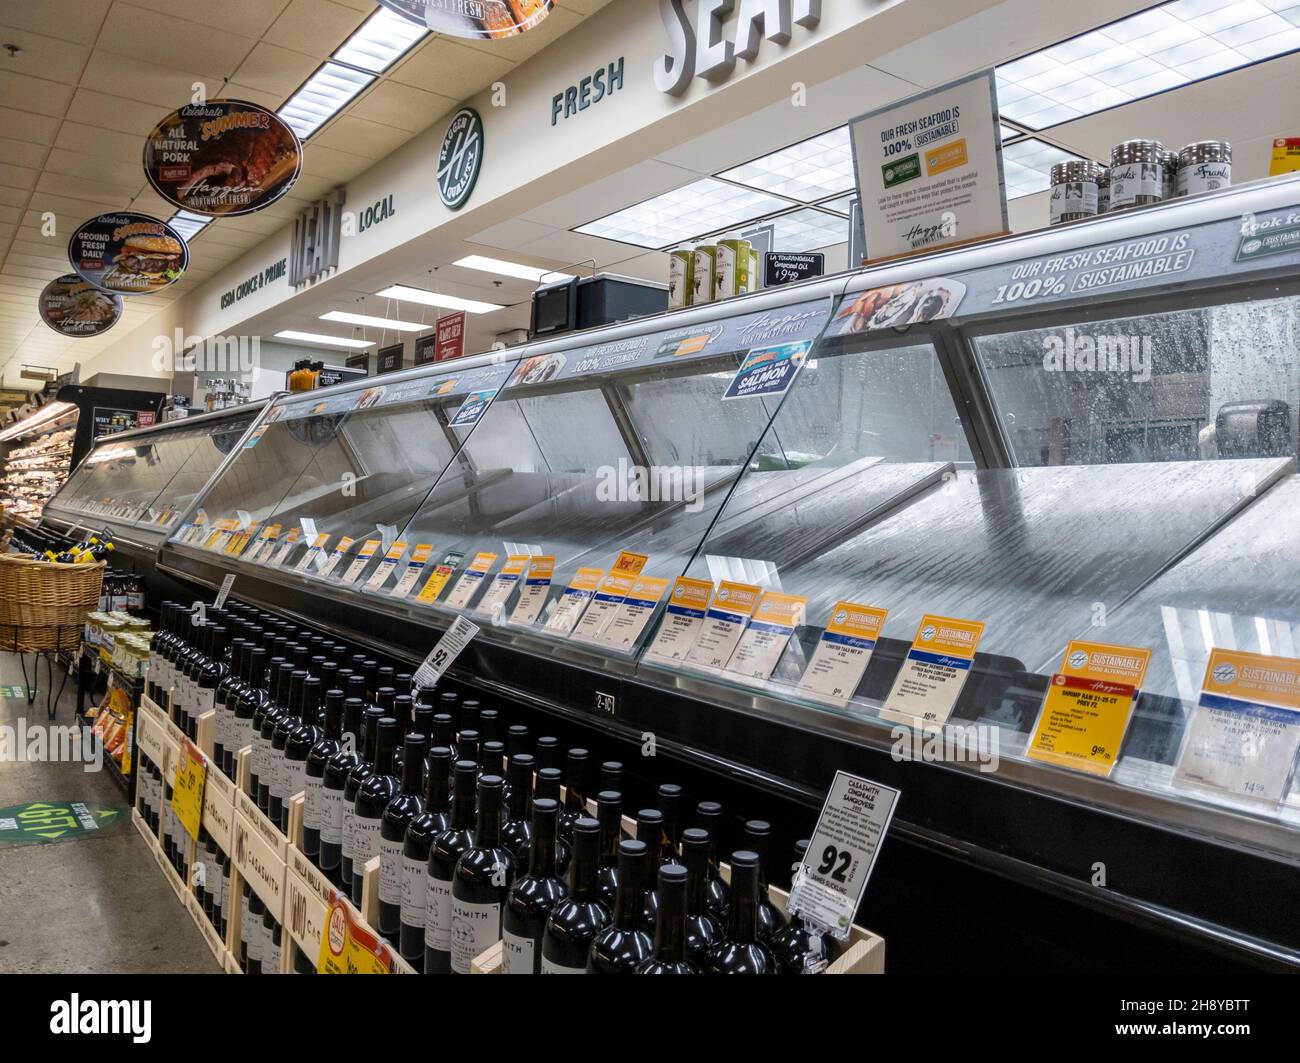 Woodinville, WA USA - circa September 2021: View of an empty seafood display case inside a Haggen grocery store Stock Photo